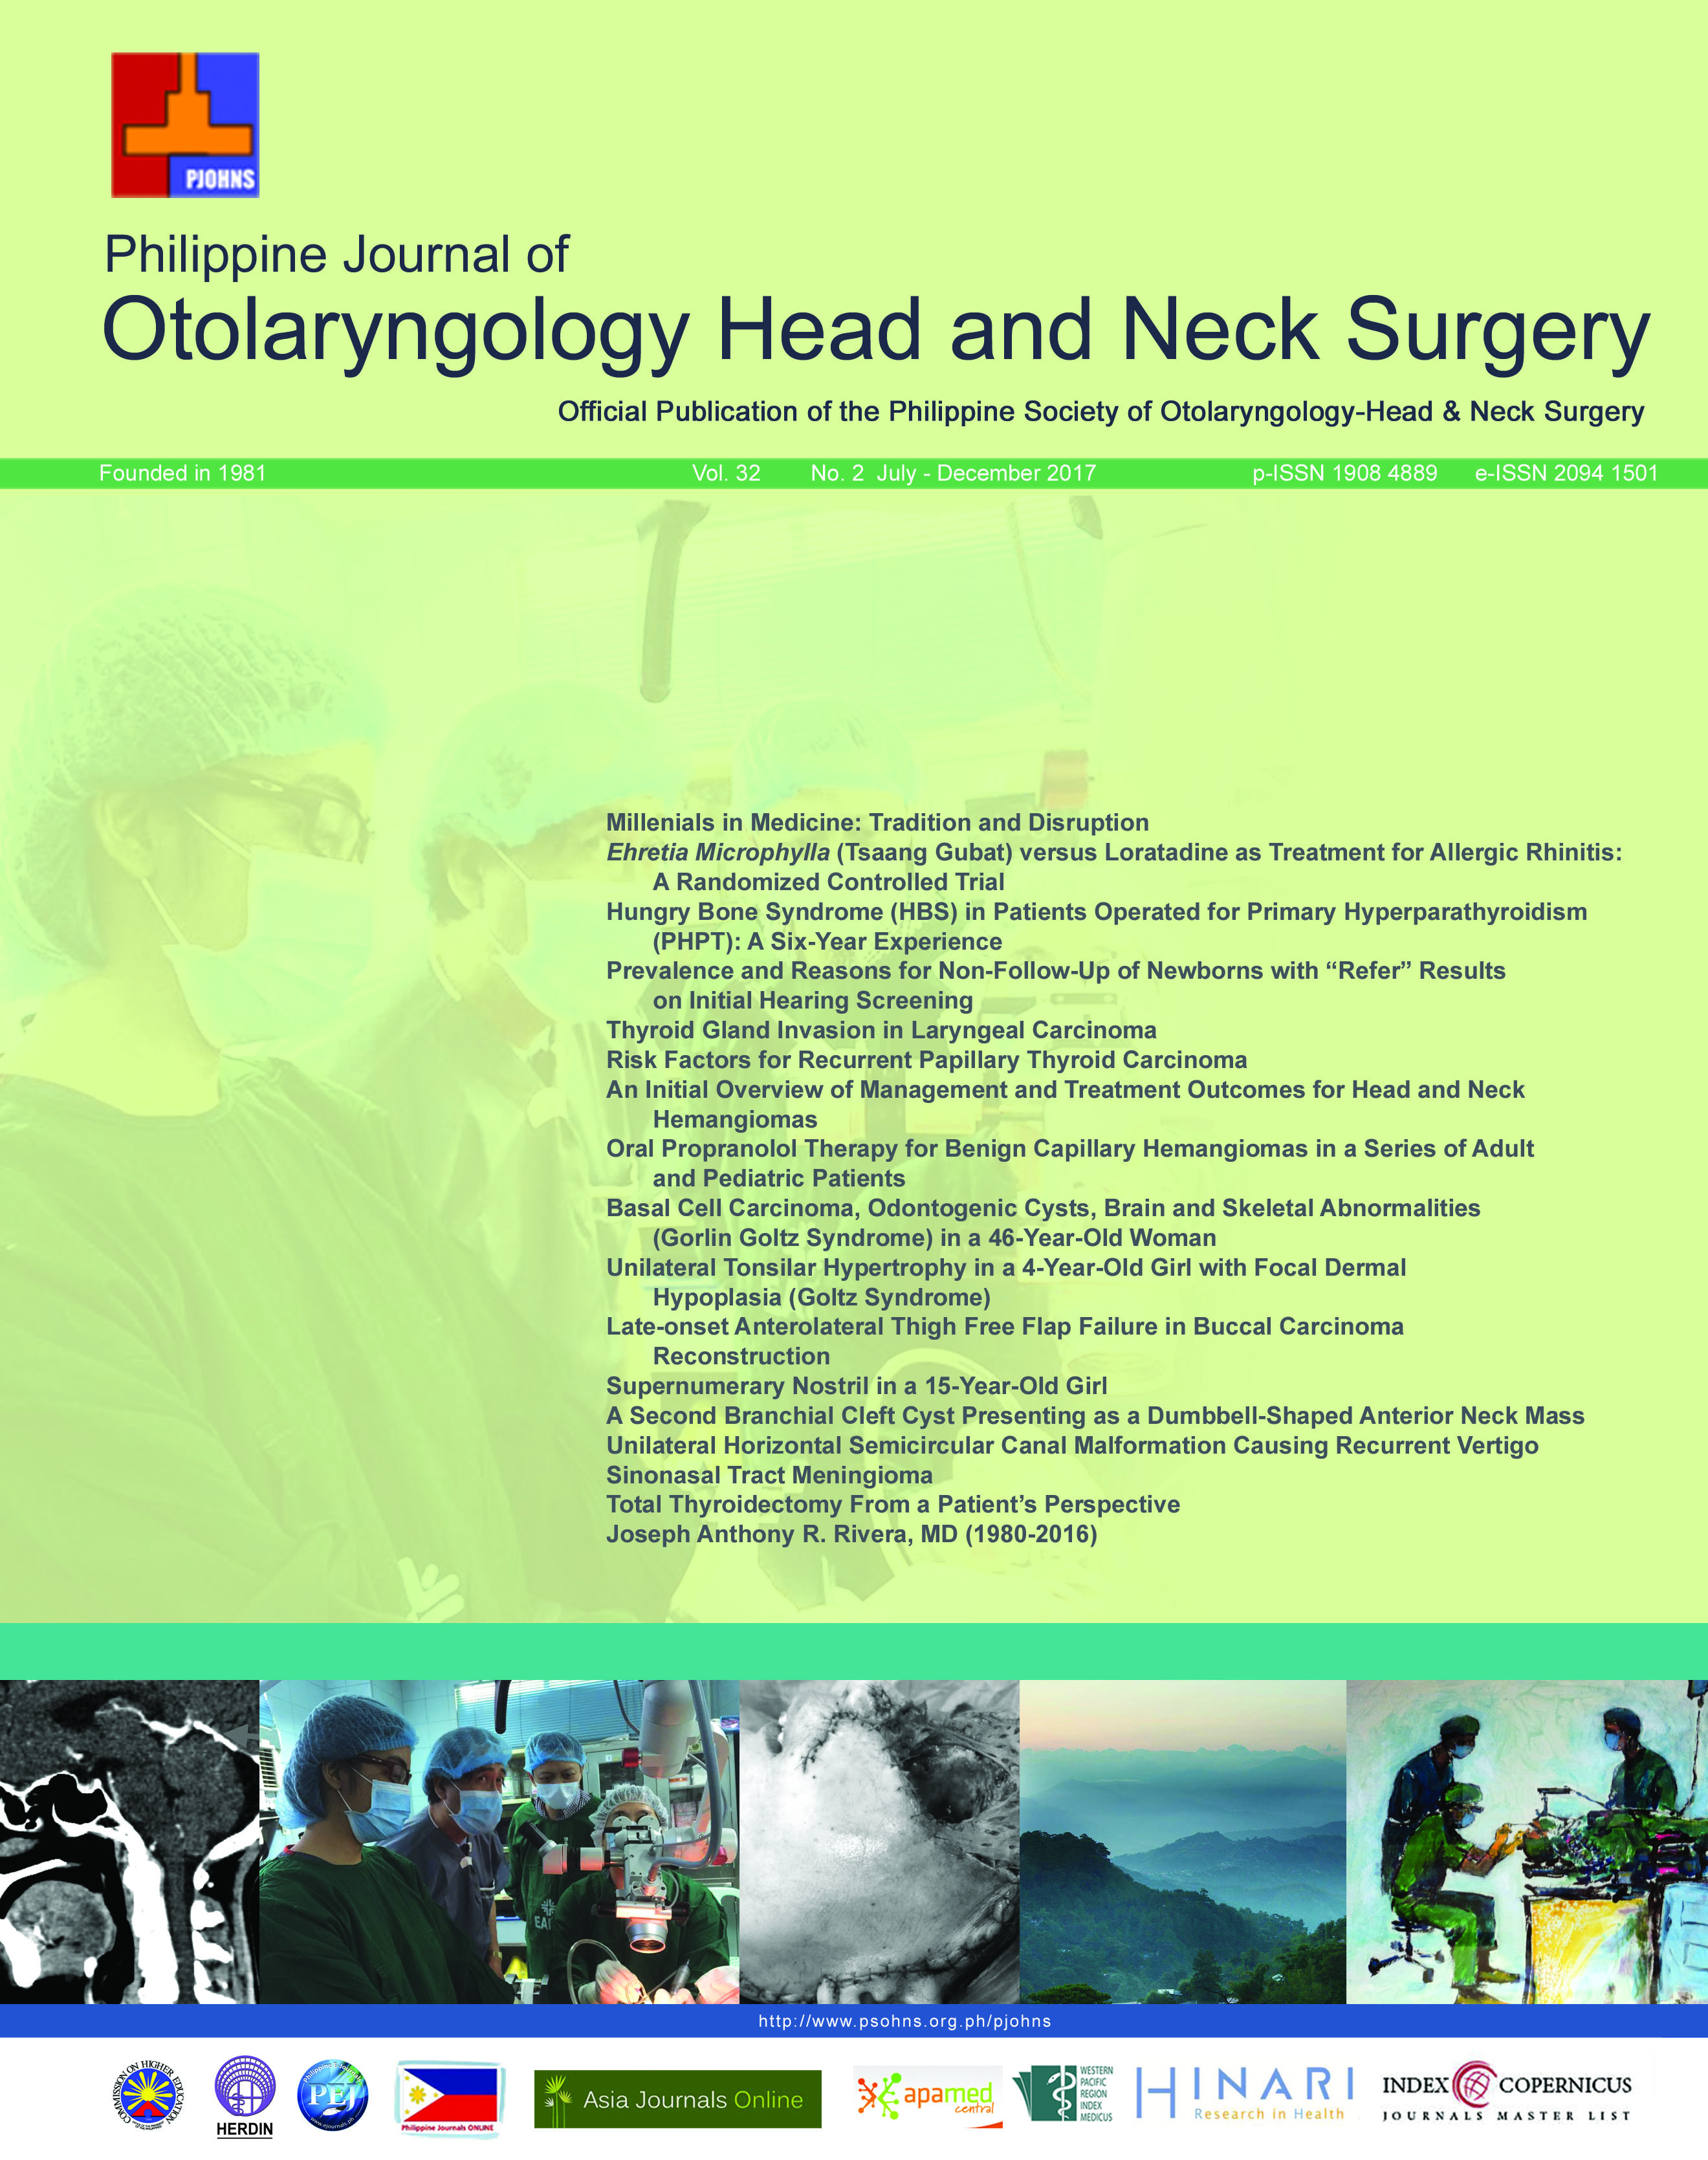 					View Vol. 32 No. 2 (2017): Philippine Journal of Otolaryngology-Head and Neck Surgery
				